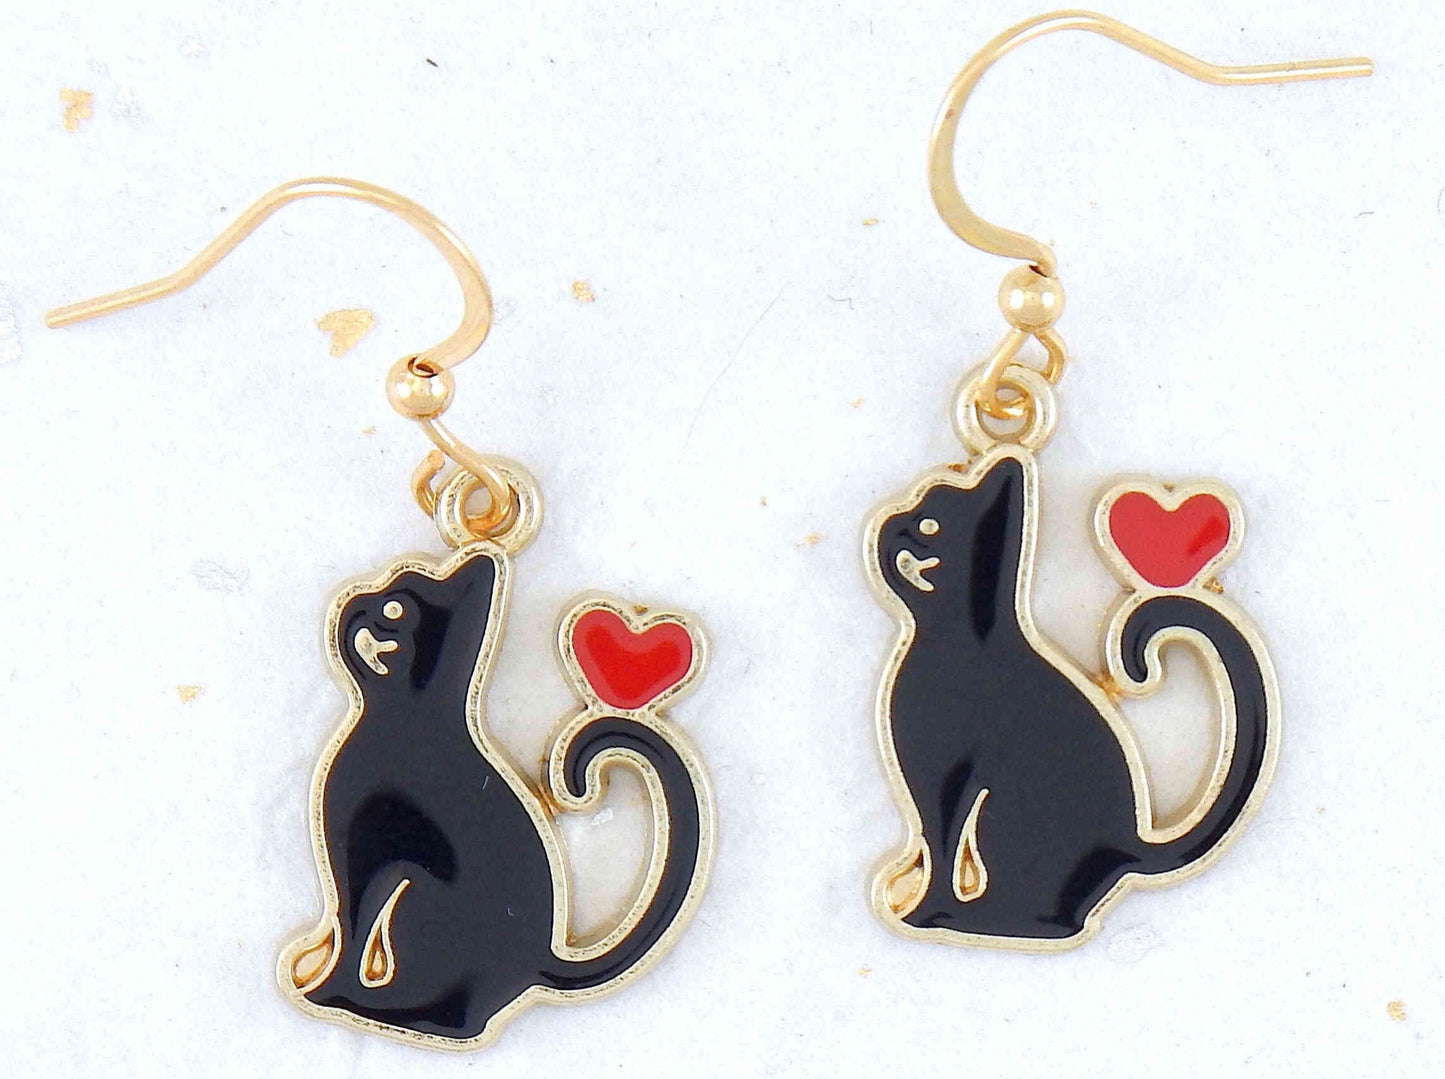 Short earrings "Cat Love" with enamelled black cats and red hearts, gold-toned stainless steel hooks